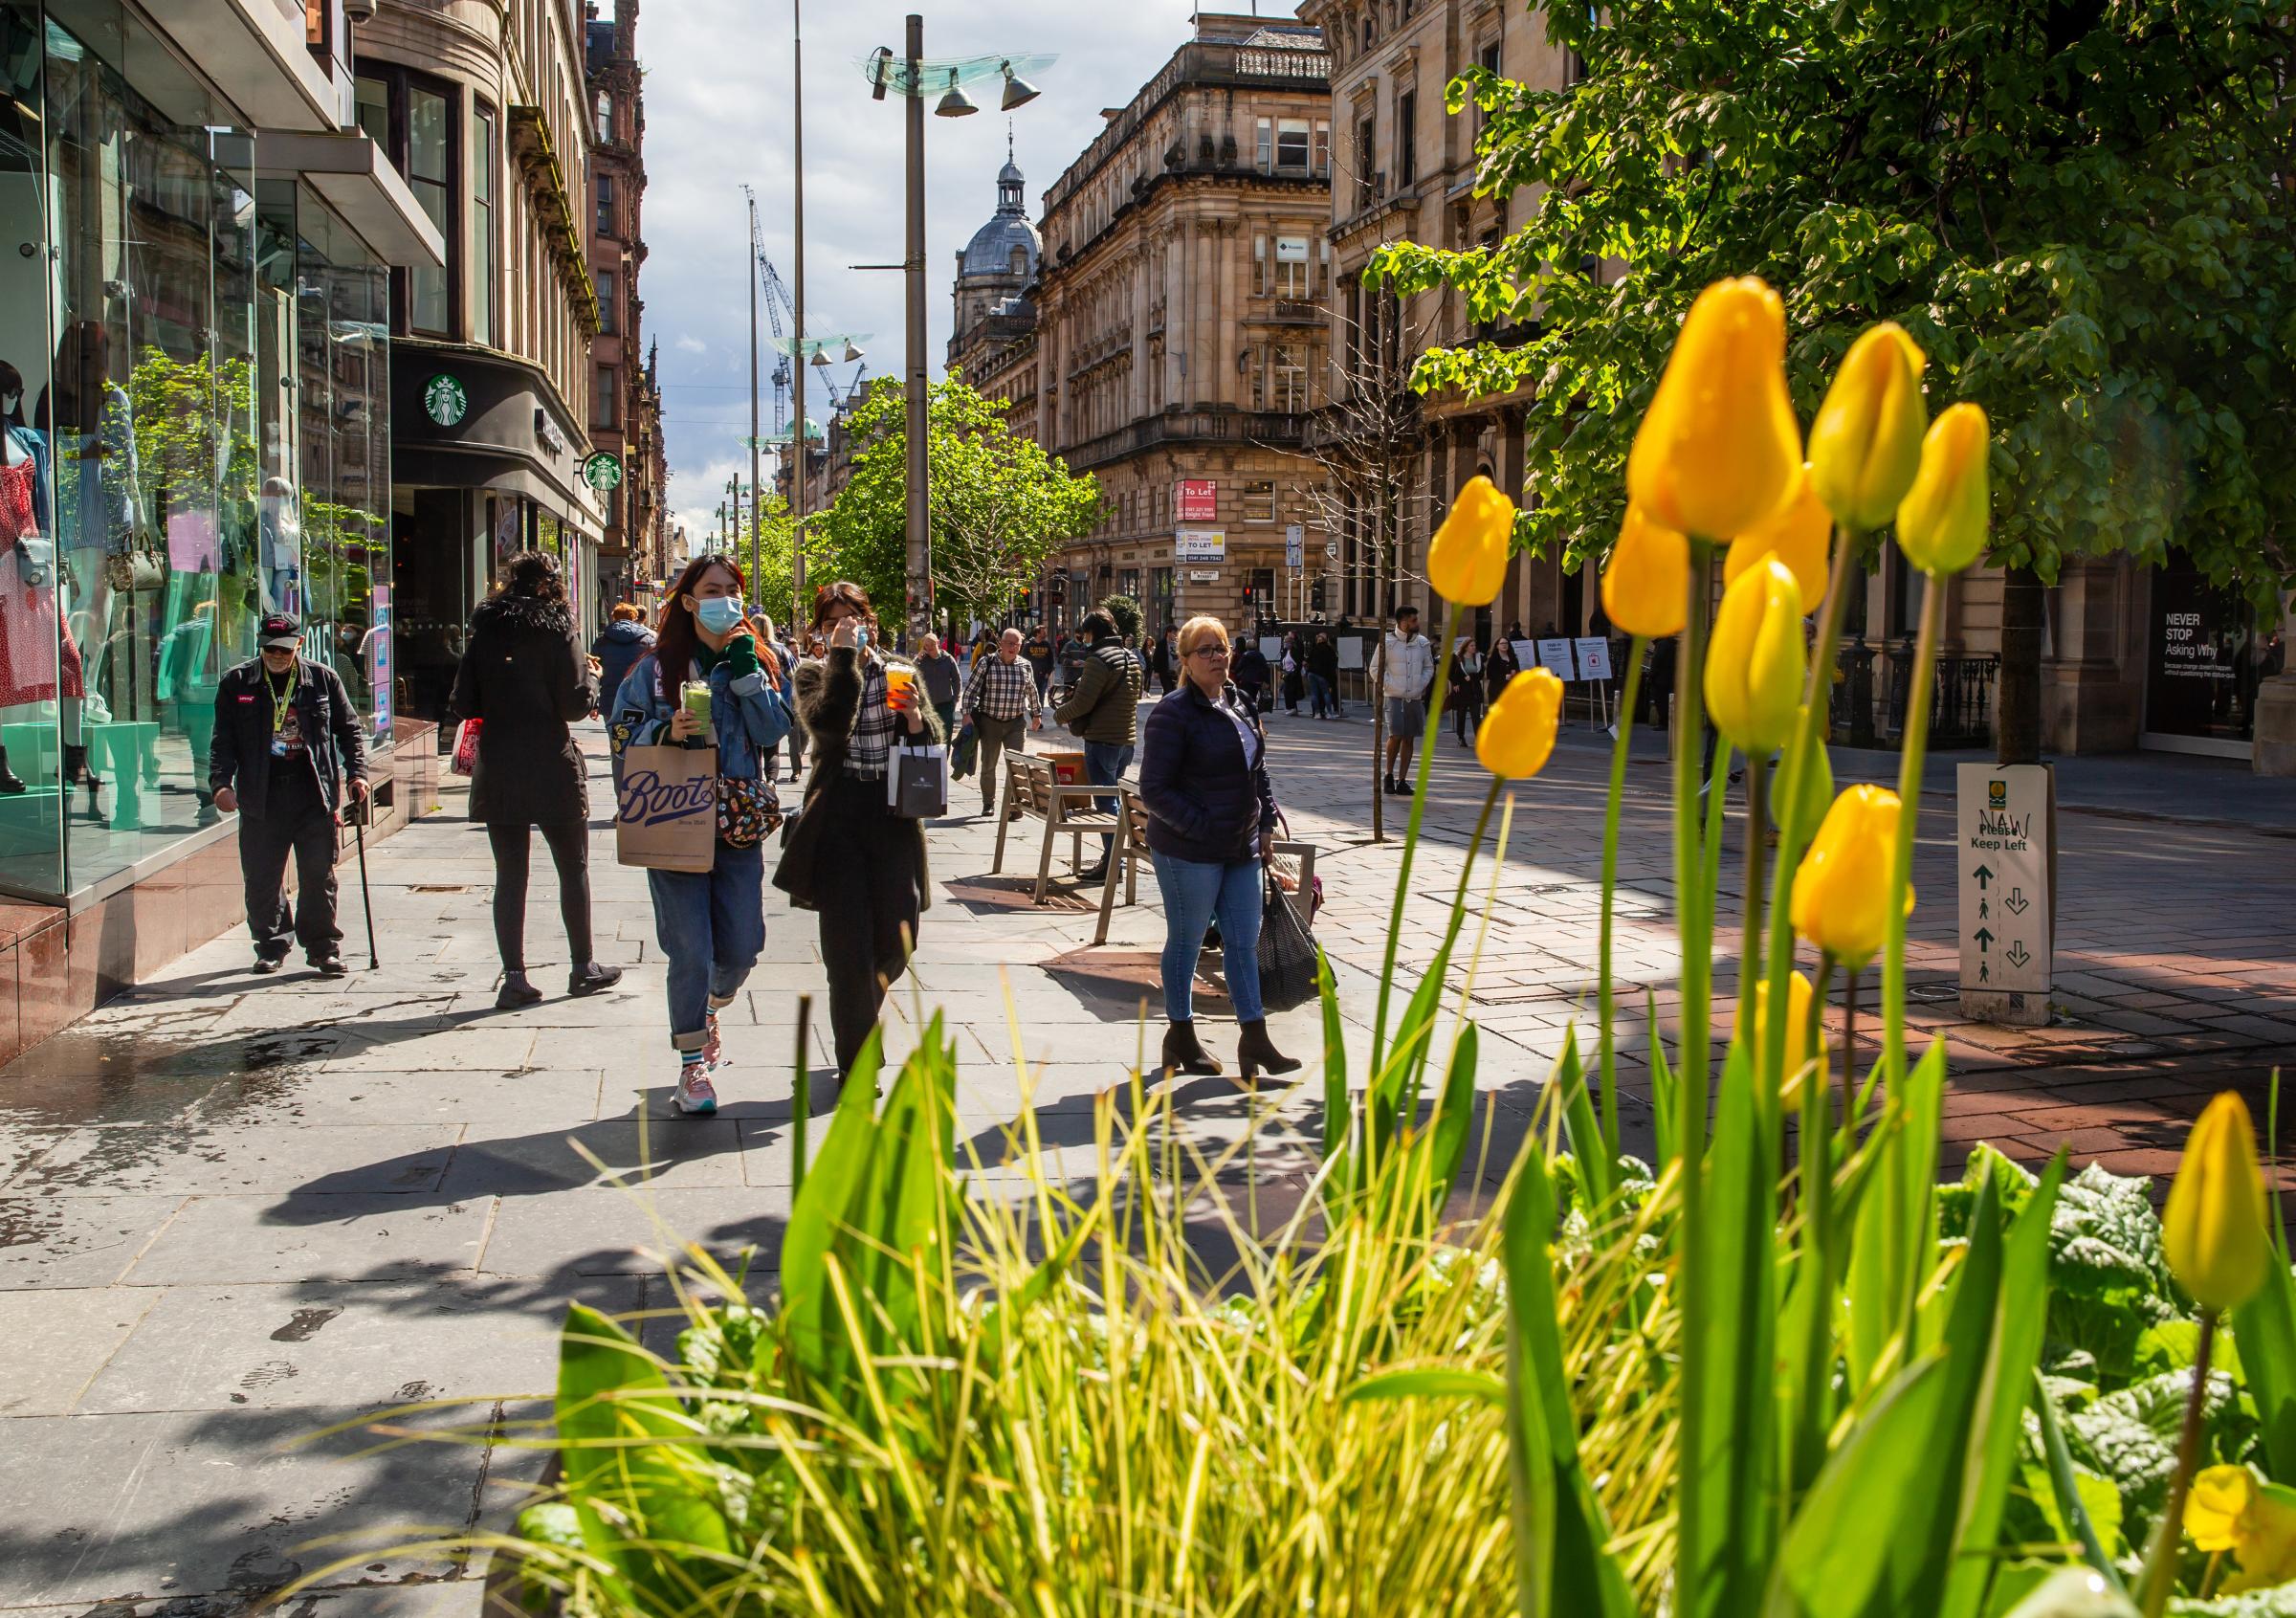 Creating people first zones will be a part of future Glasgow plans